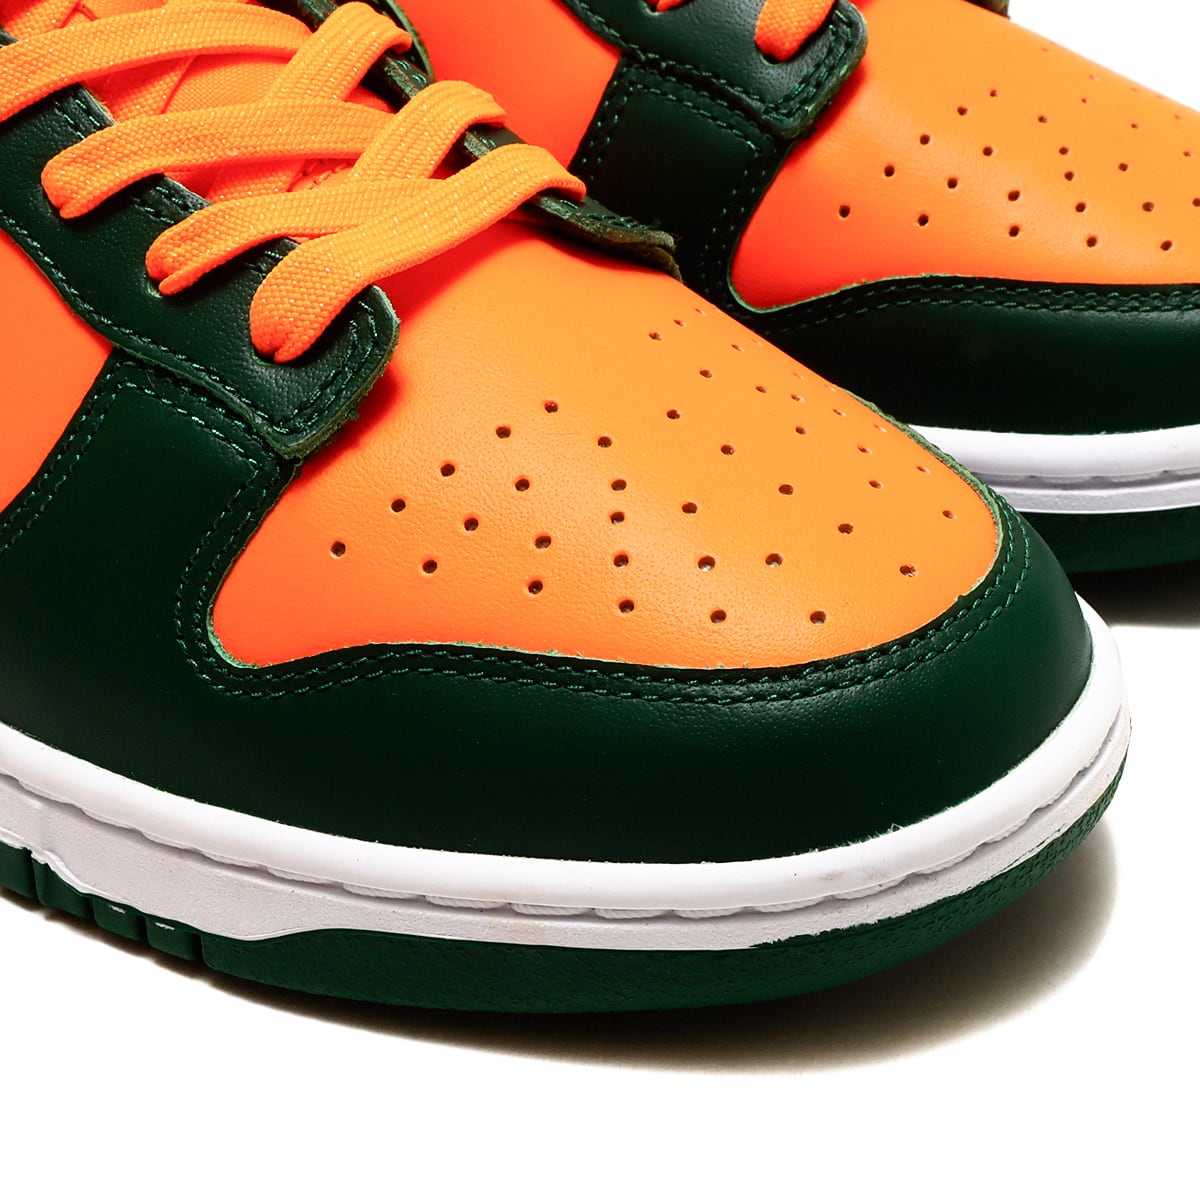 Nike WMNS Dunk Low "Gorge Green"